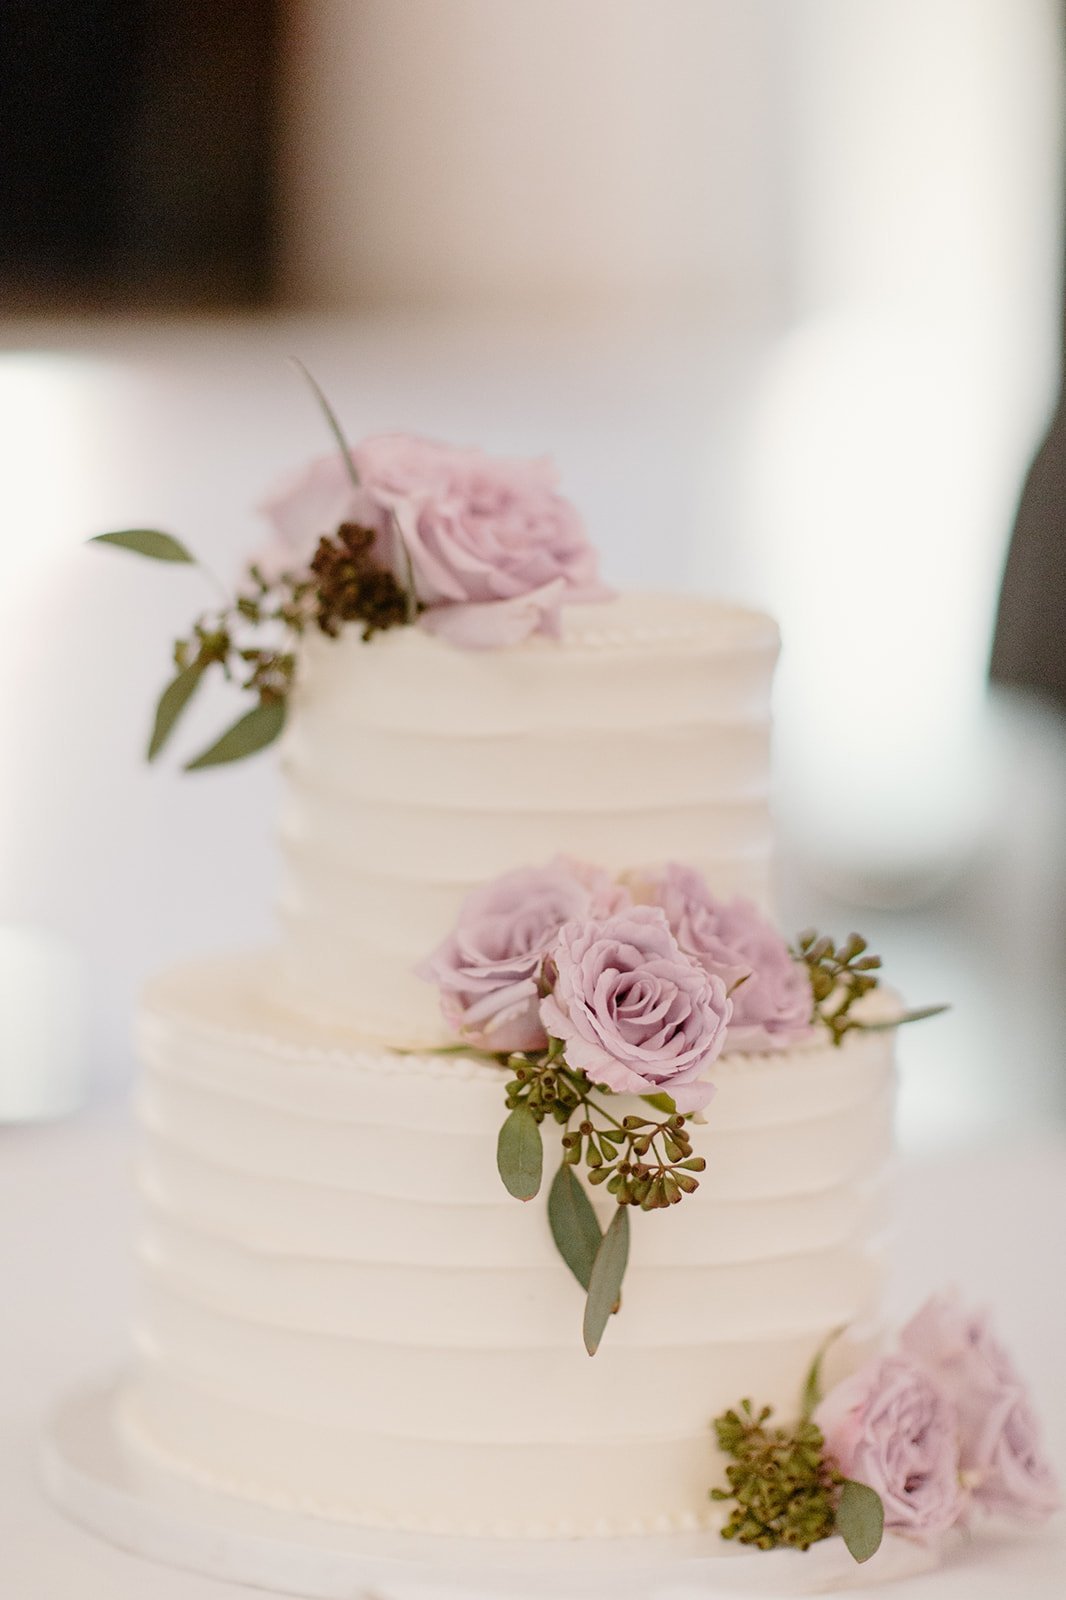 wedding+cake+decorated+with+roses.jpg